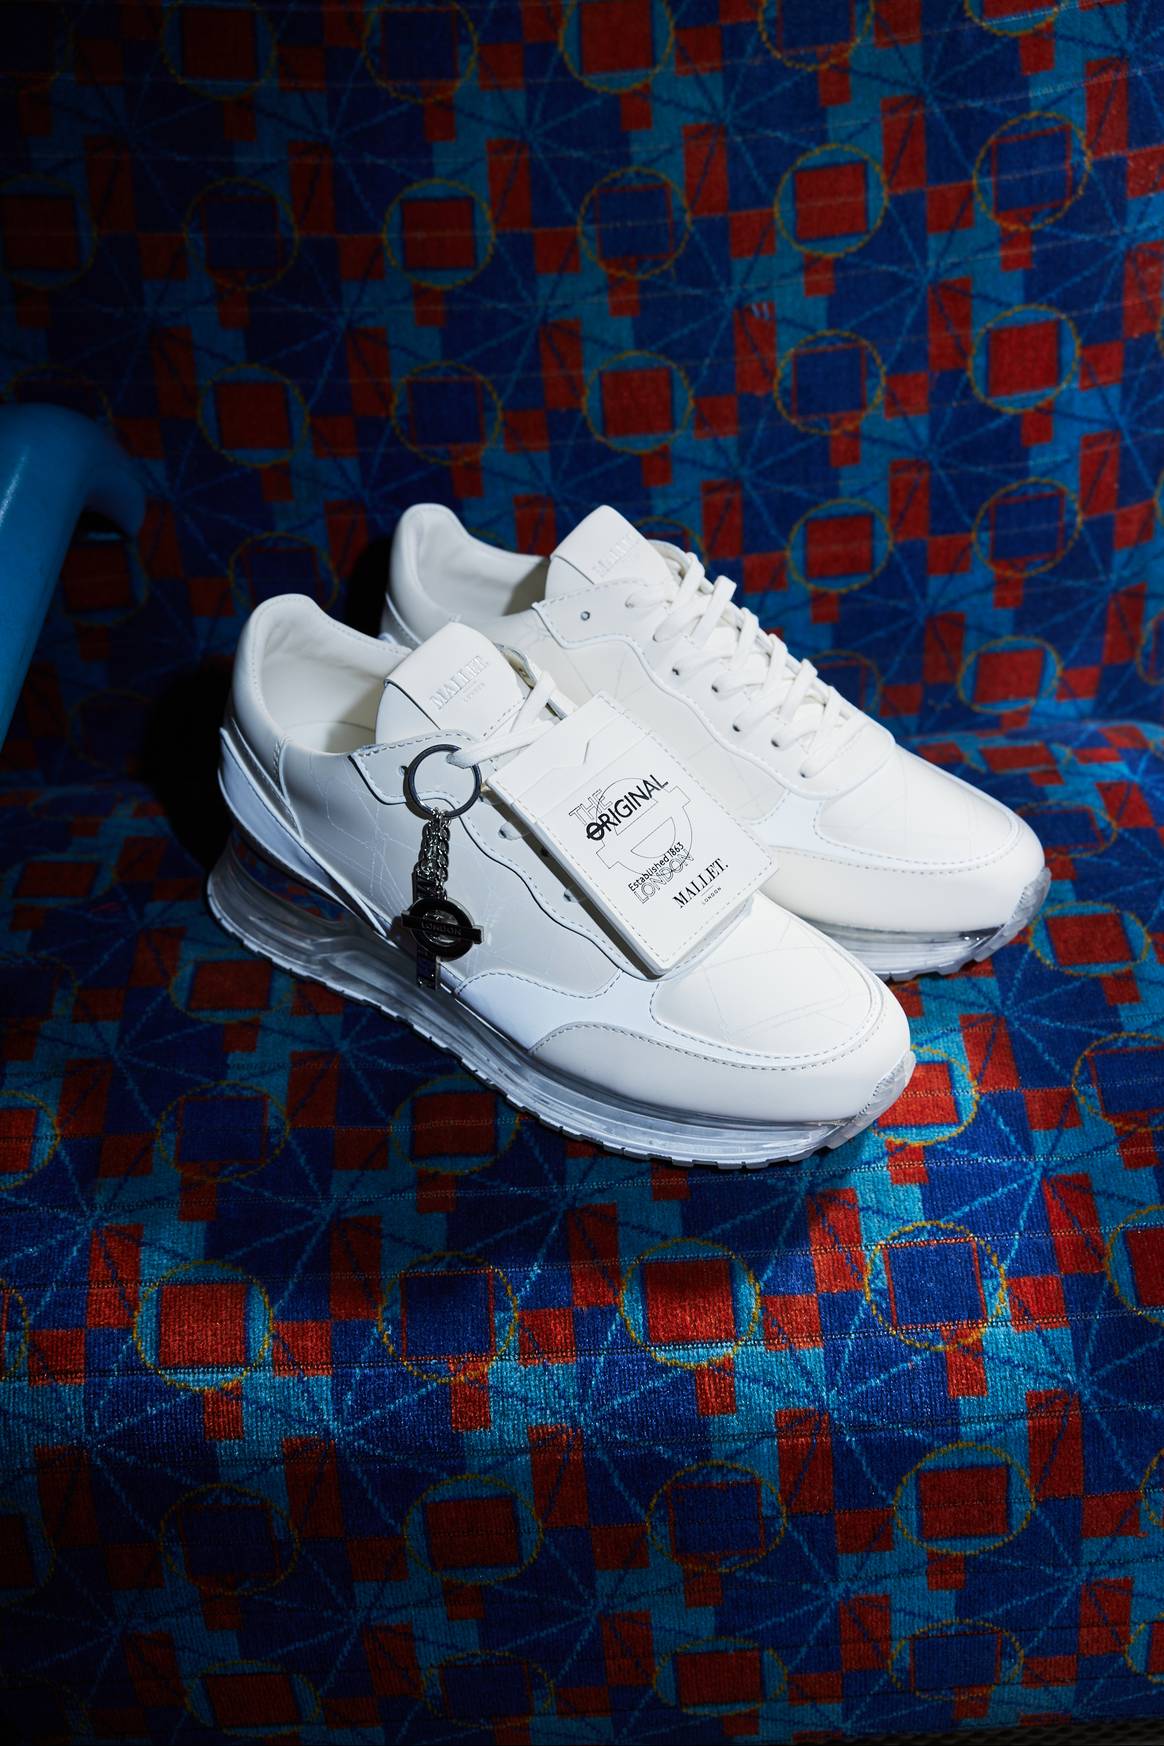 Image: Mallet London; Mallet x TfL trainers